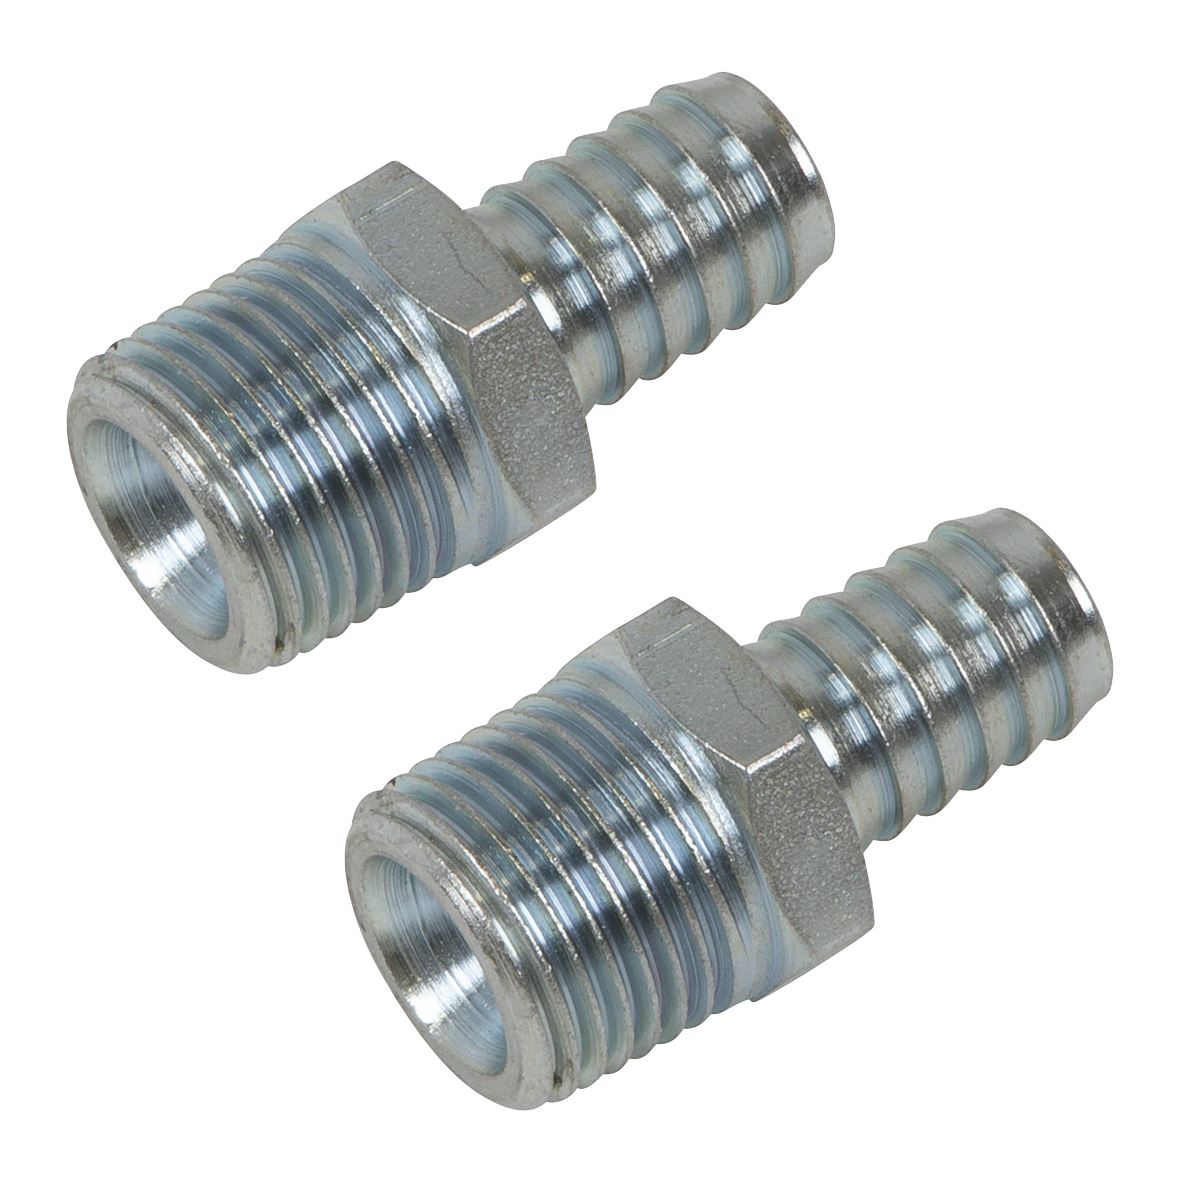 PCL Screwed Tailpiece Male 1/2"BSPT - 1/2" Hose - Pack of 2